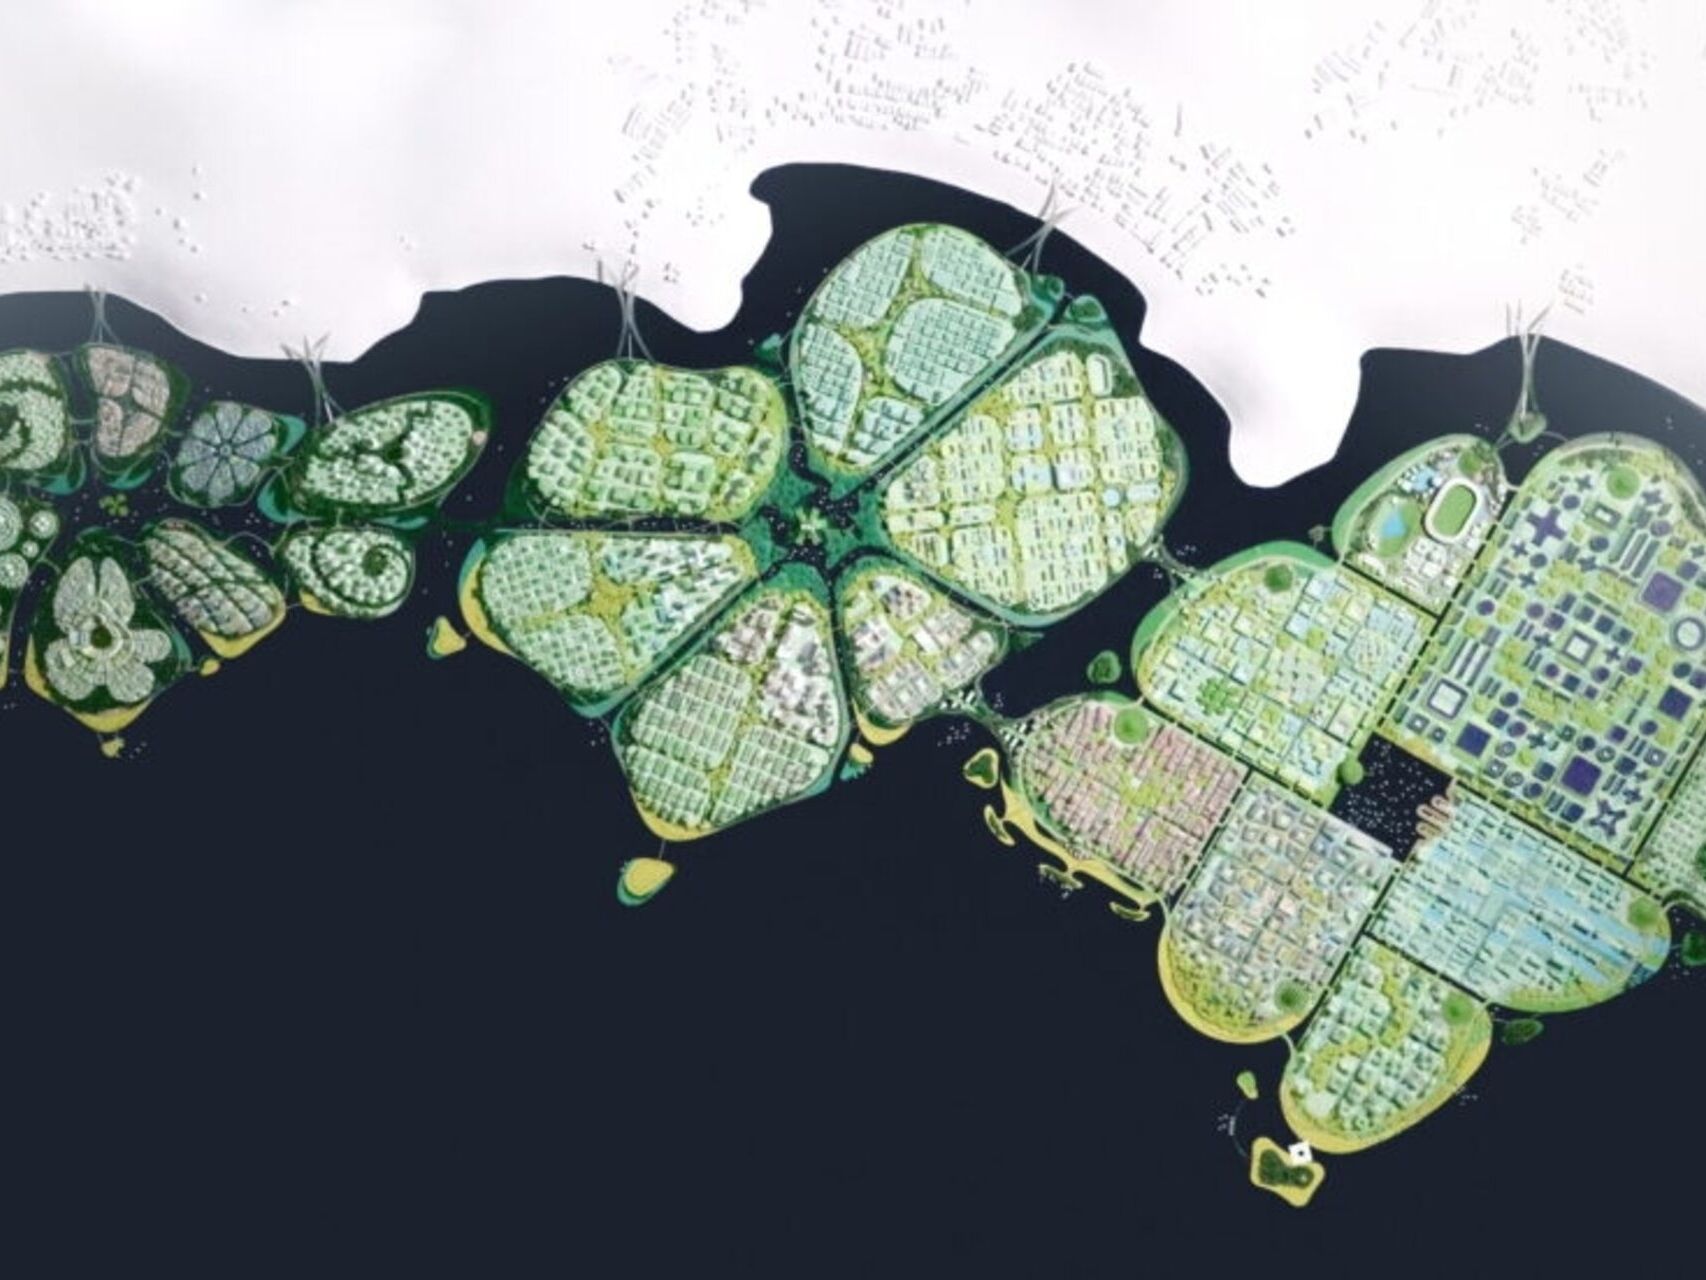 BiodiverCity: an aerial rendering of the three islands The Channels, The Mangroves and The Lagoon, which will form the innovative and sustainable city of BiodiverCity in 2030 in Malaysia near Penang